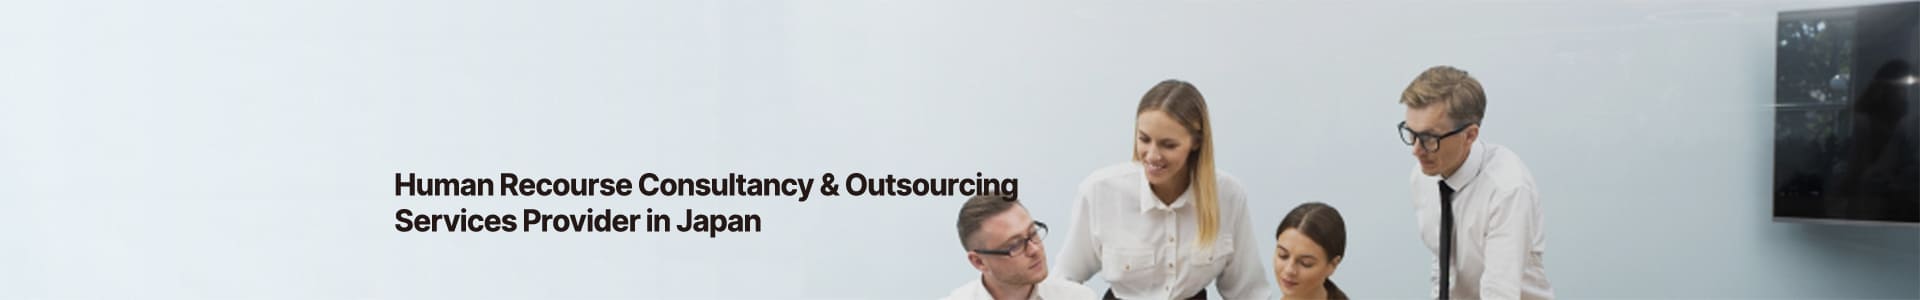 Human Recourse Consultancy & Outsourcing Services Provider in Japan